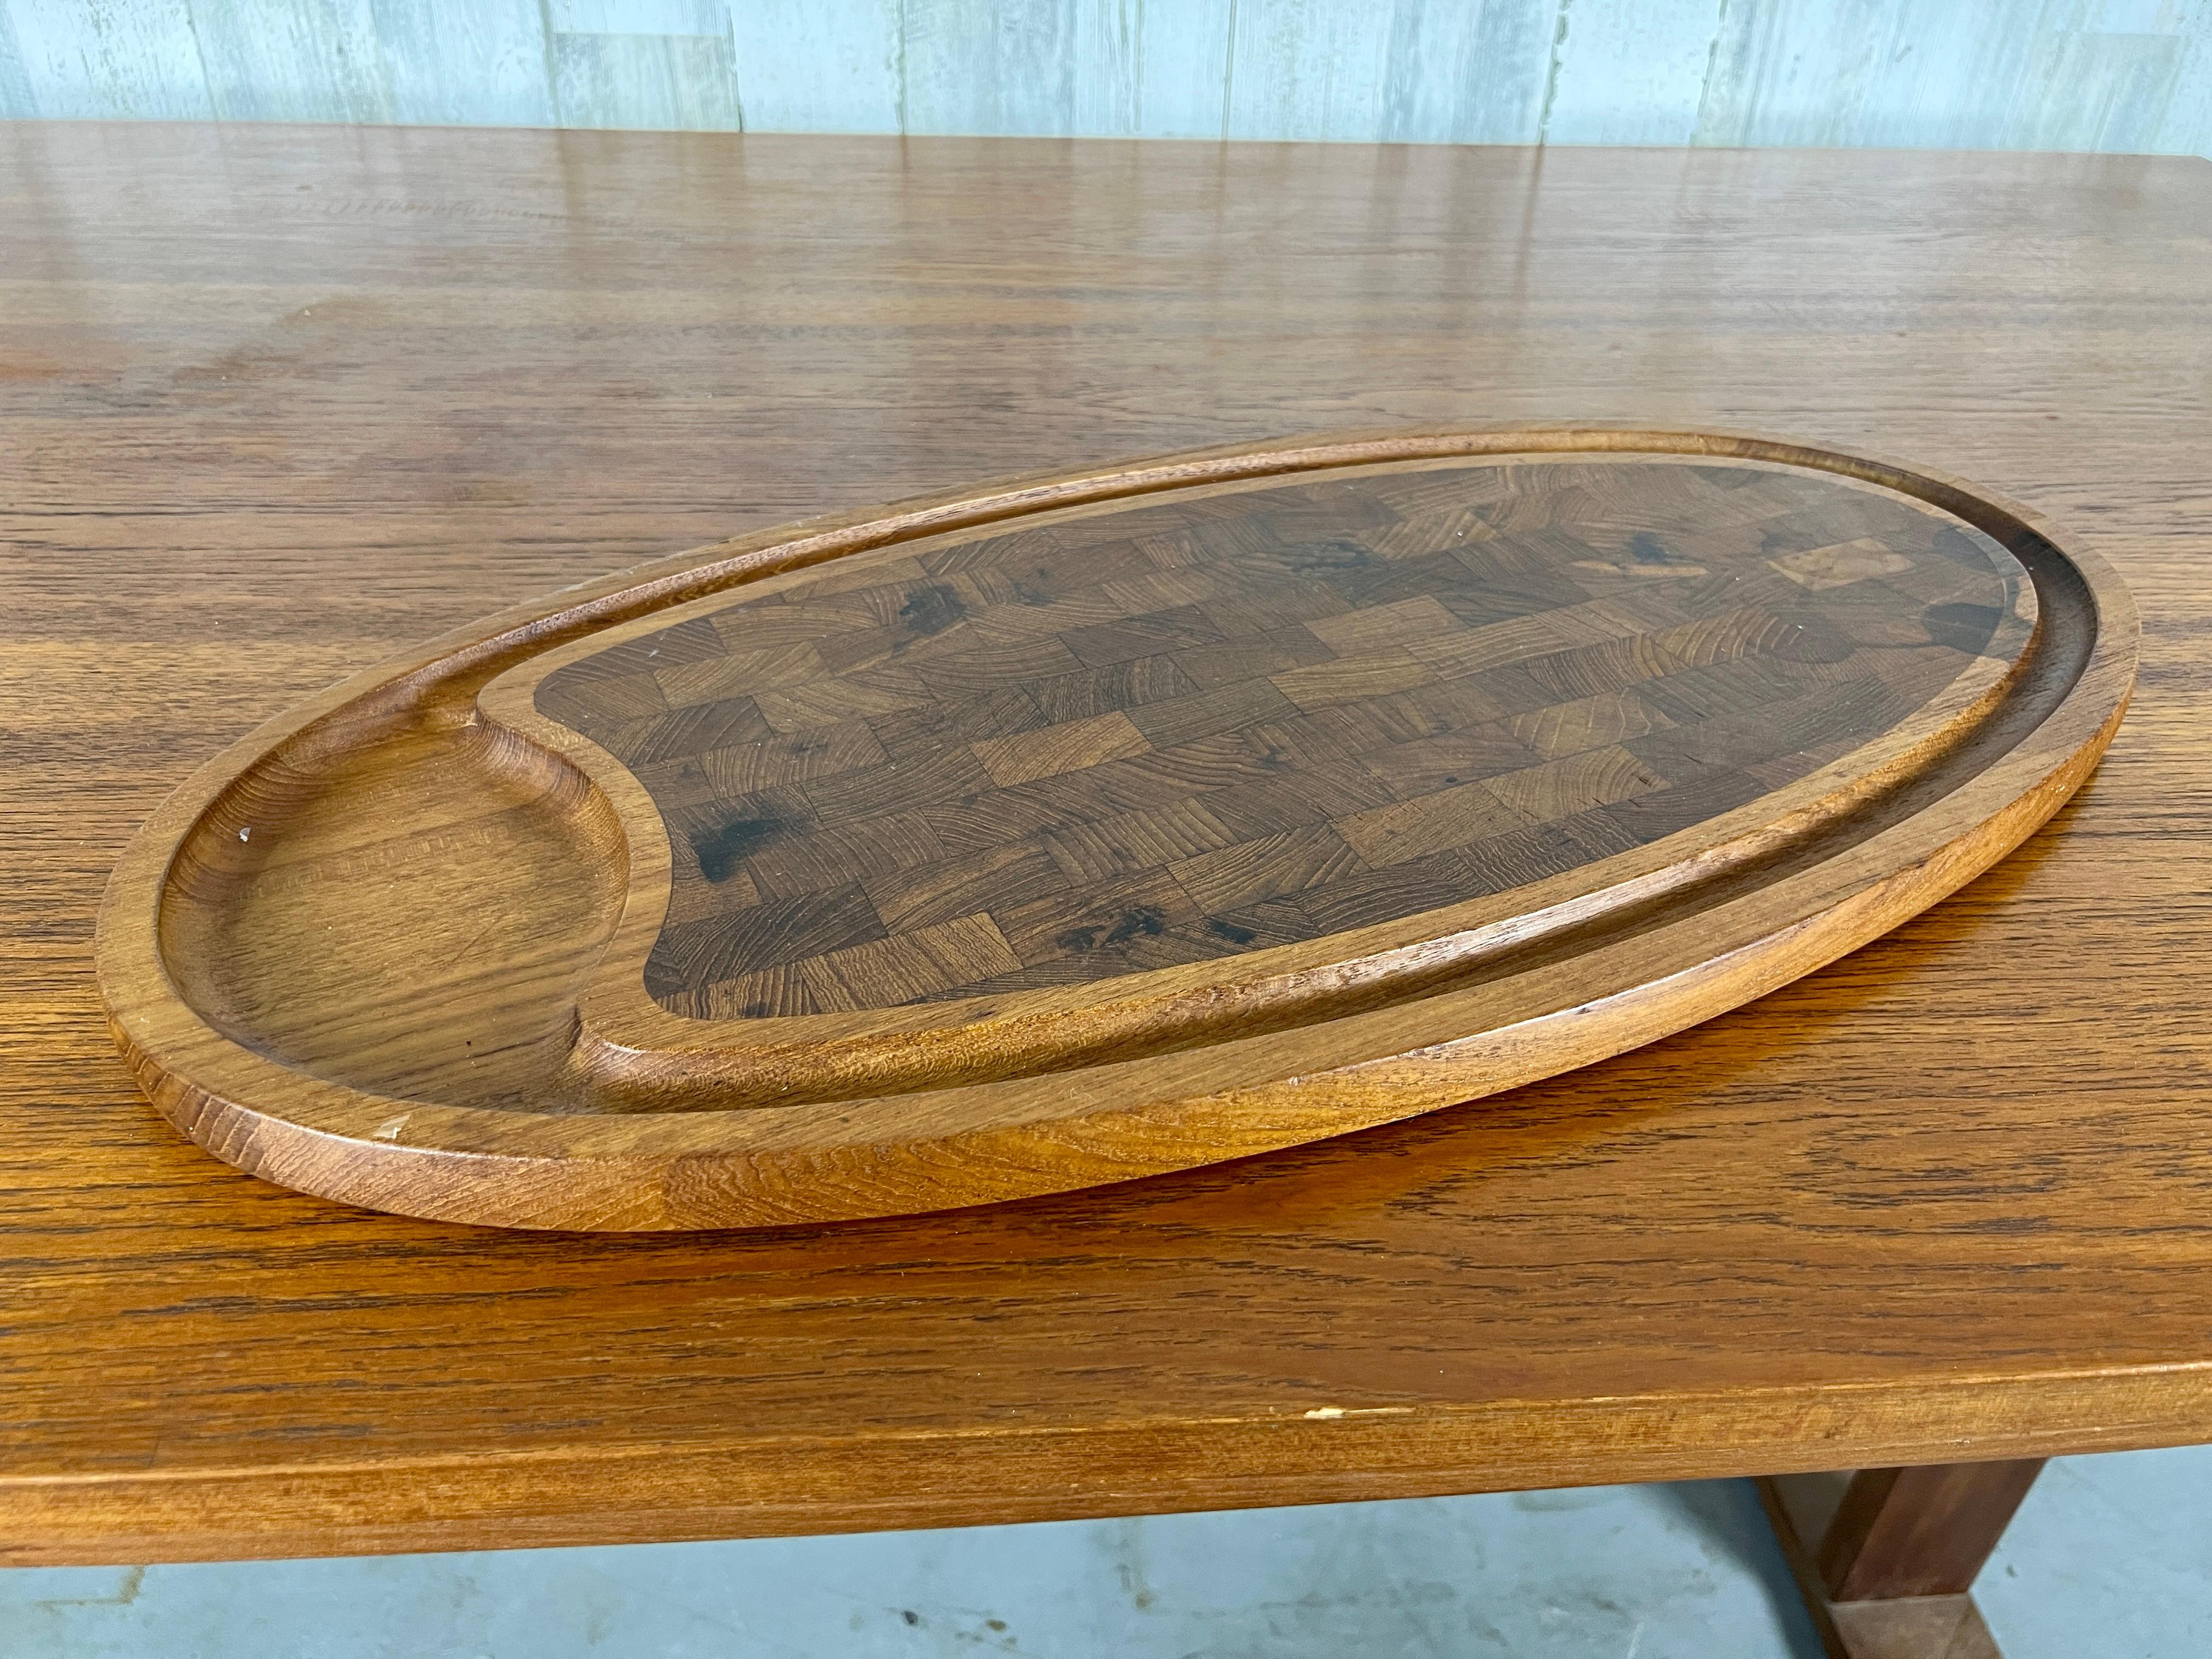 Oval solid teak cheese board with end grain center.
Designed by Jens Quistgaard.